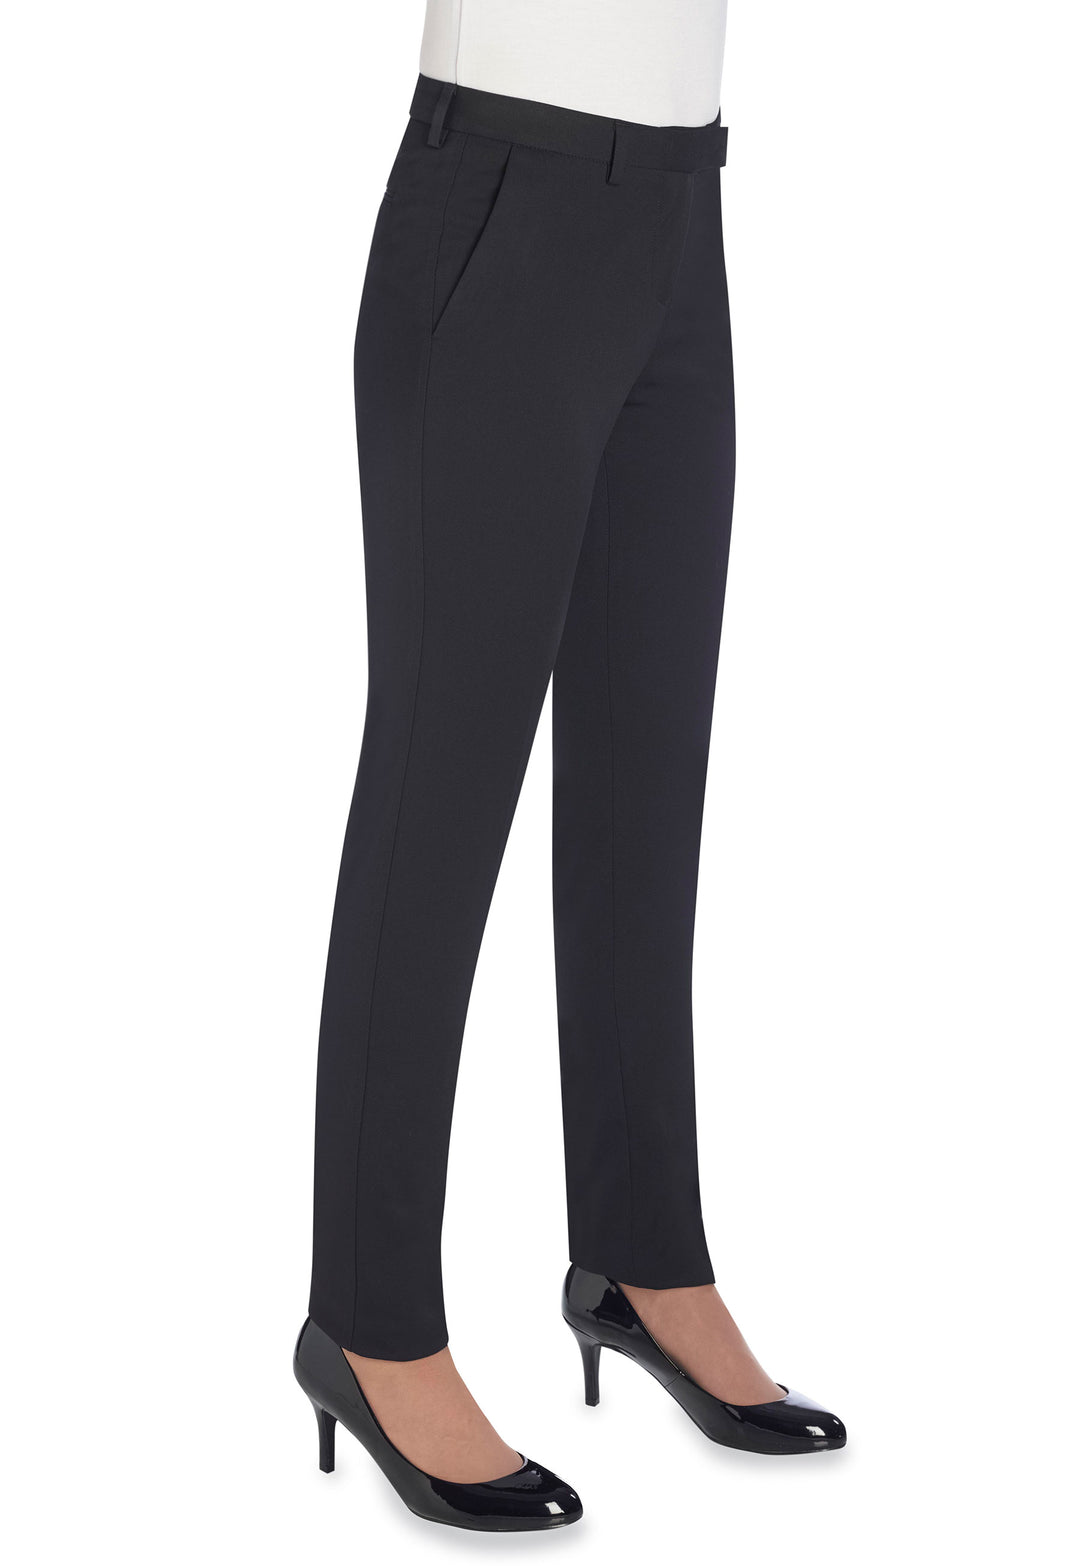 Ophelia Slim Fit Trousers 2276